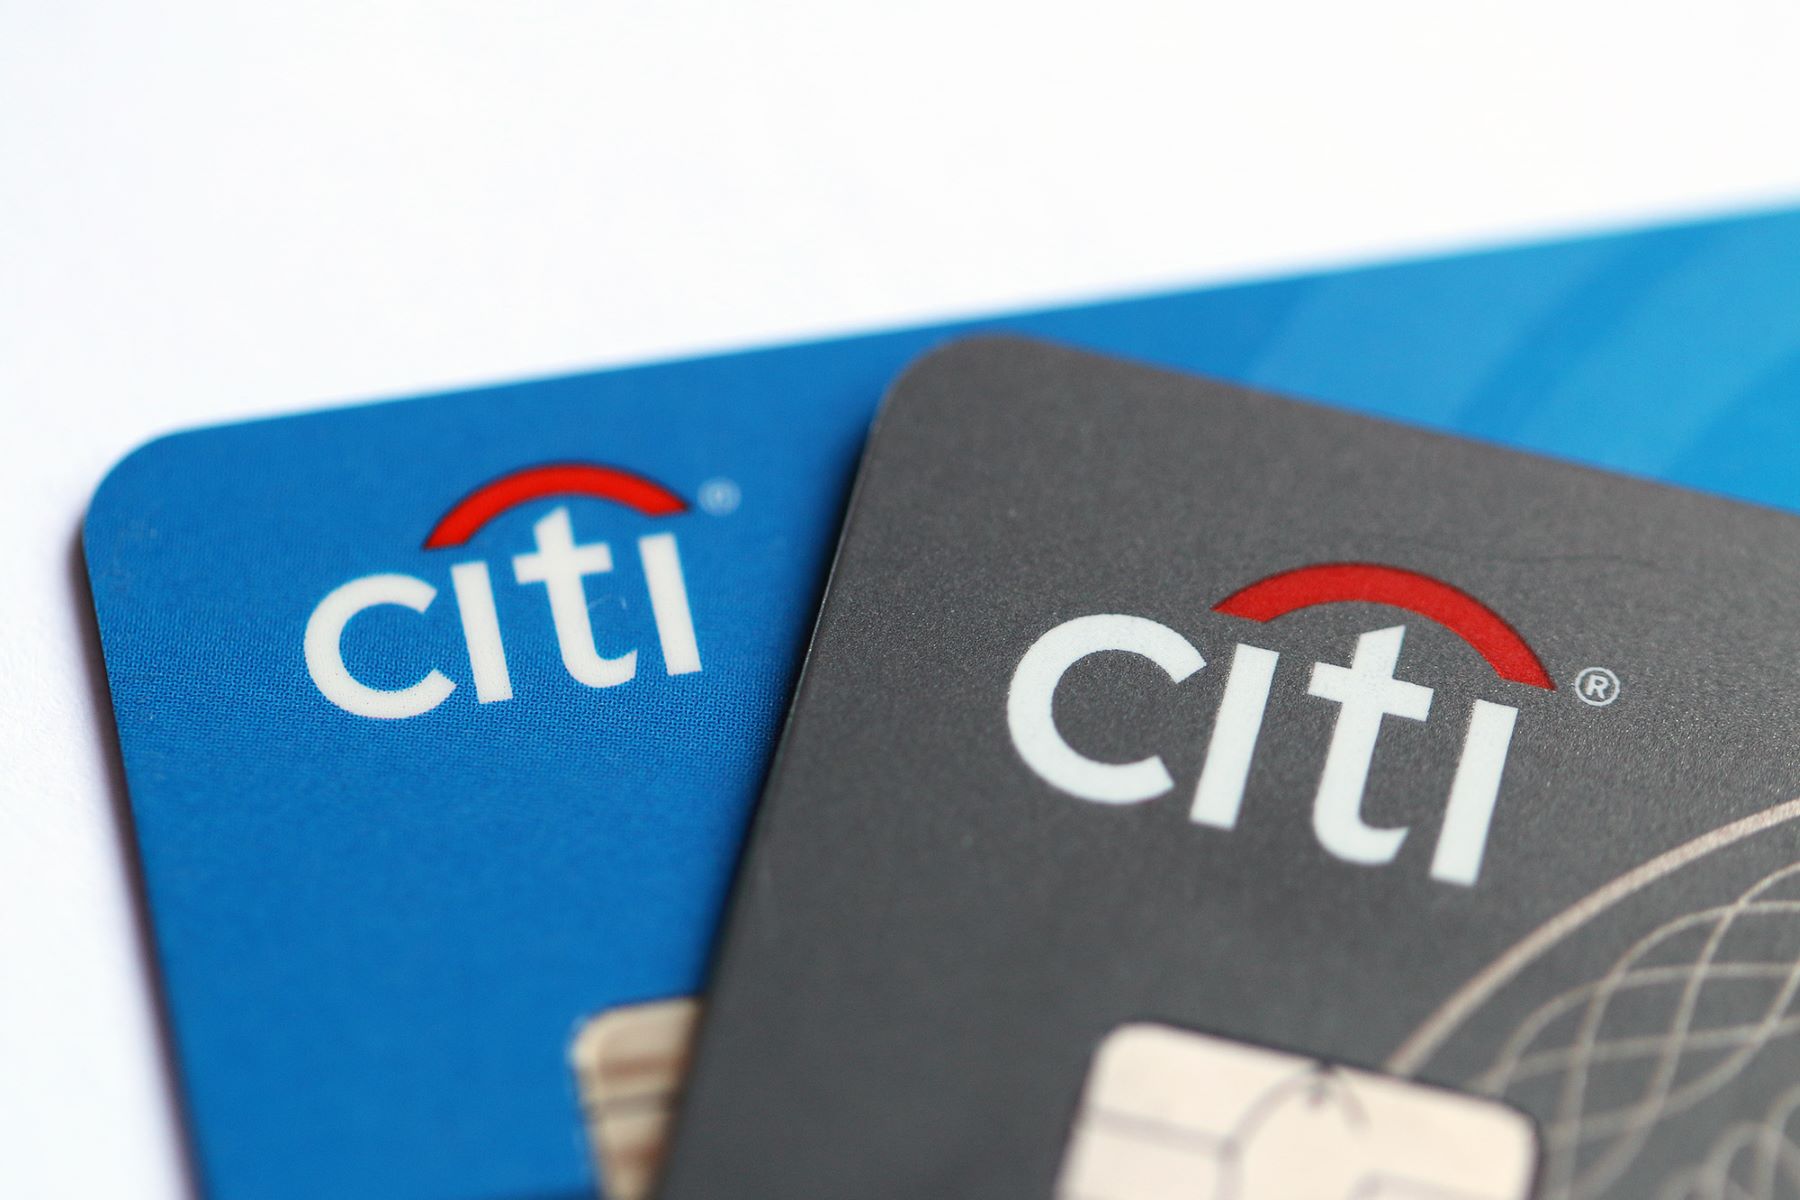 How To Close Citi Credit Card